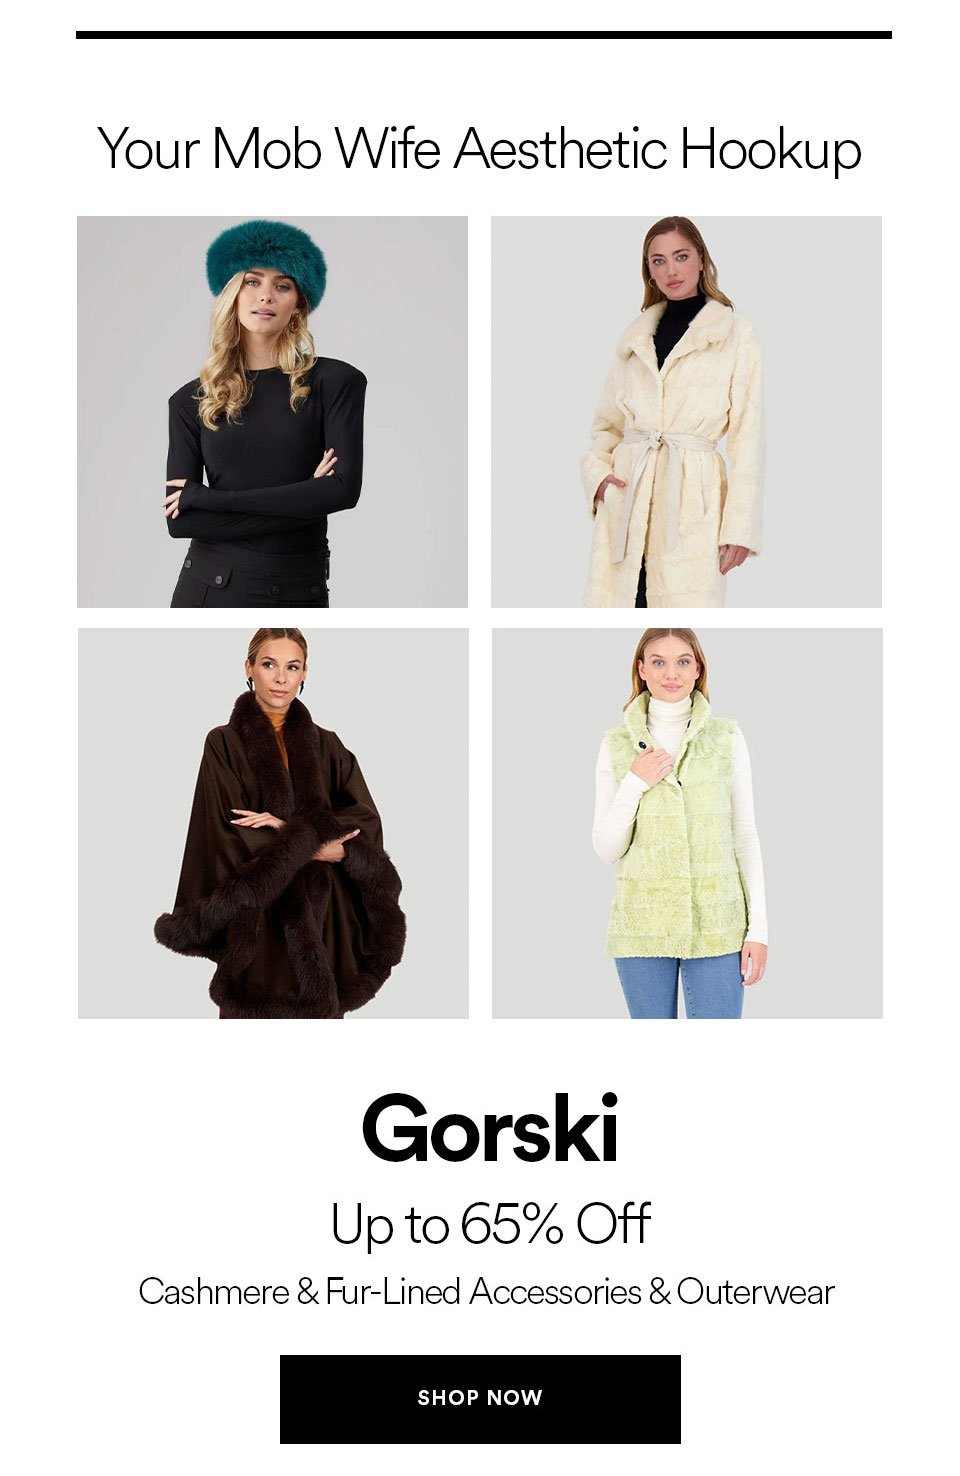 GORSKI - UP TO 65% OFF - CASHMERE & FUR-LINED ACCESSORES & OUTERWEAR